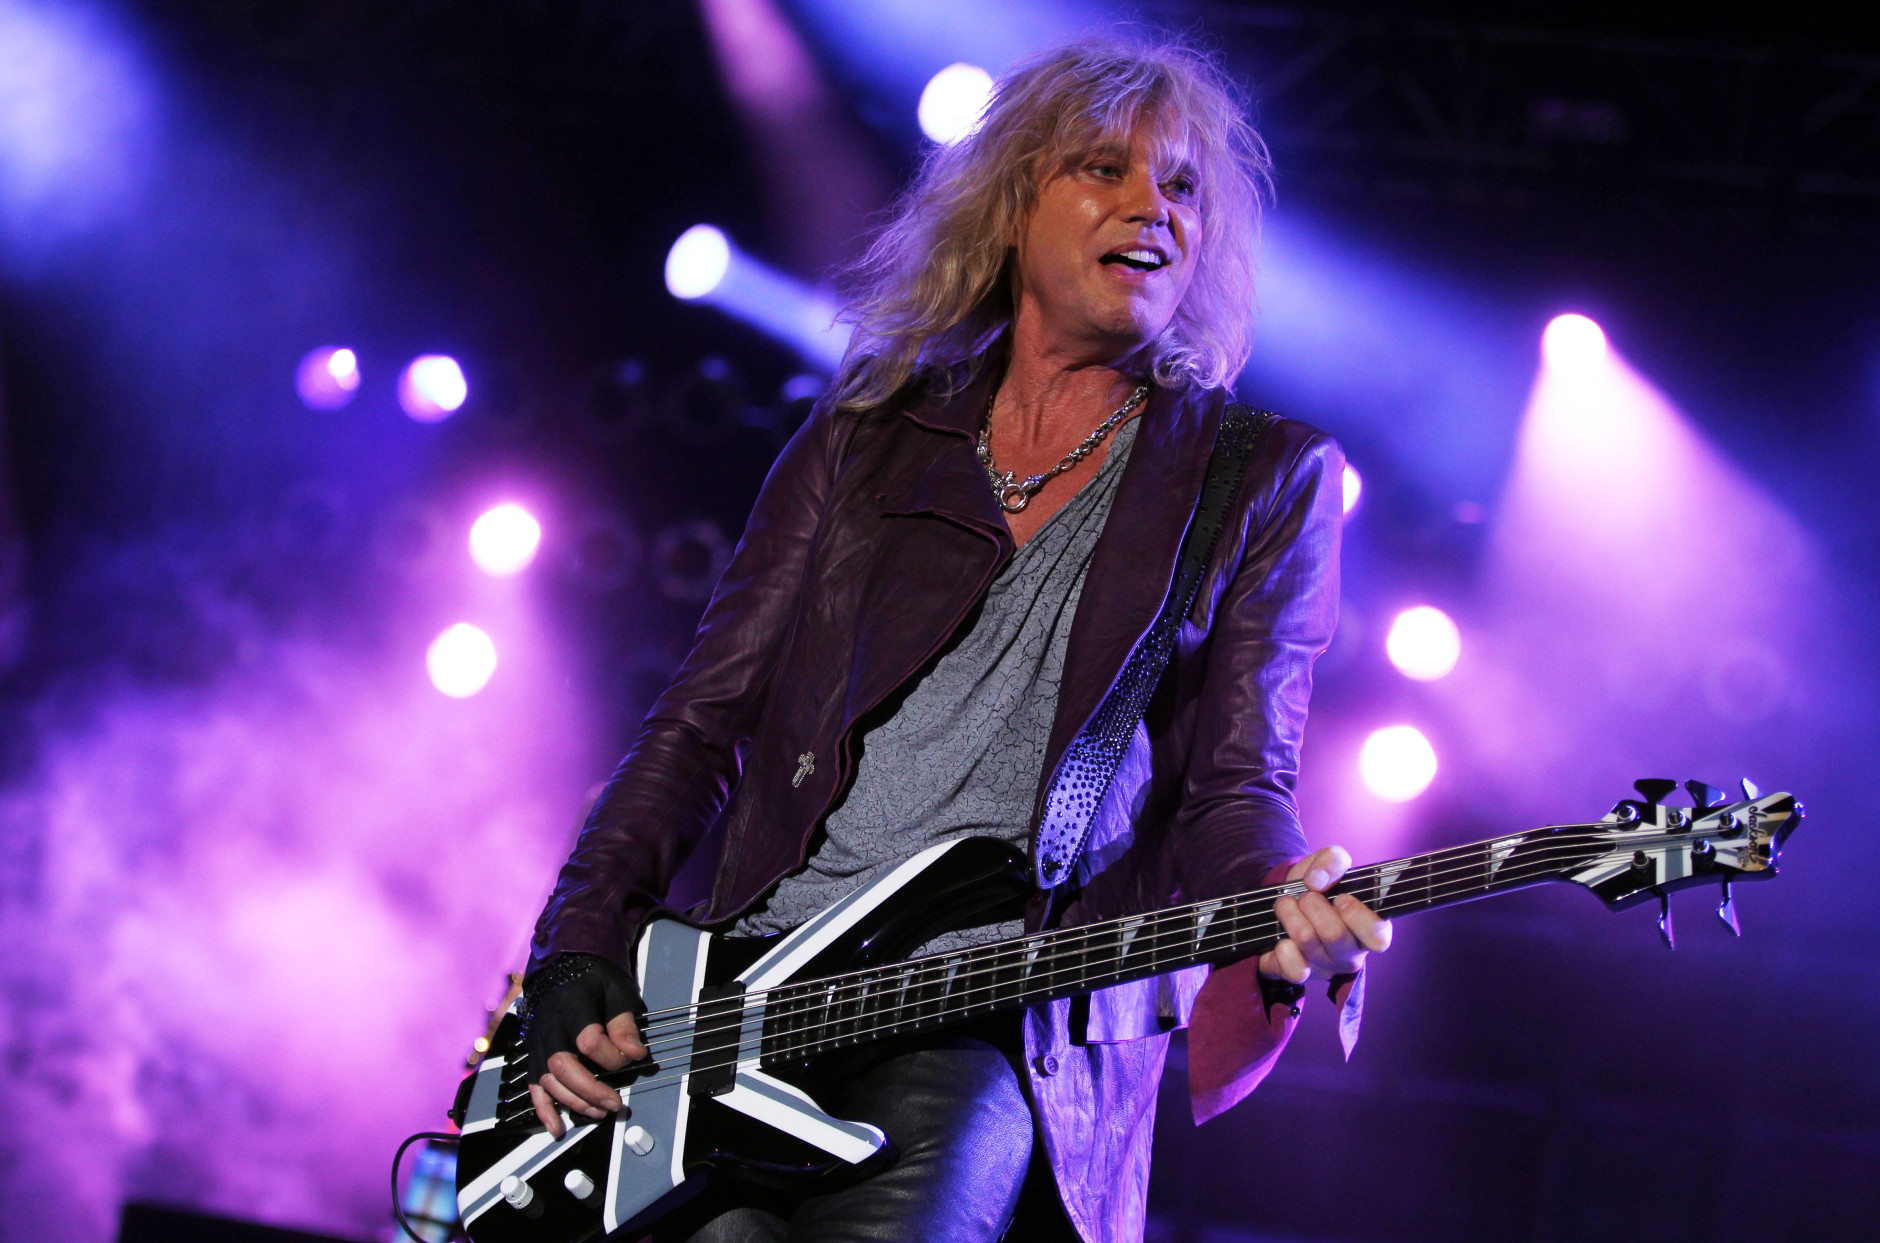 Rick Savage performs with the band Def Leppard at the after party for the "Rock of Ages" premiere on Friday June 8, 2012, in Los Angeles. (Photo by Matt Sayles/Invision/AP)